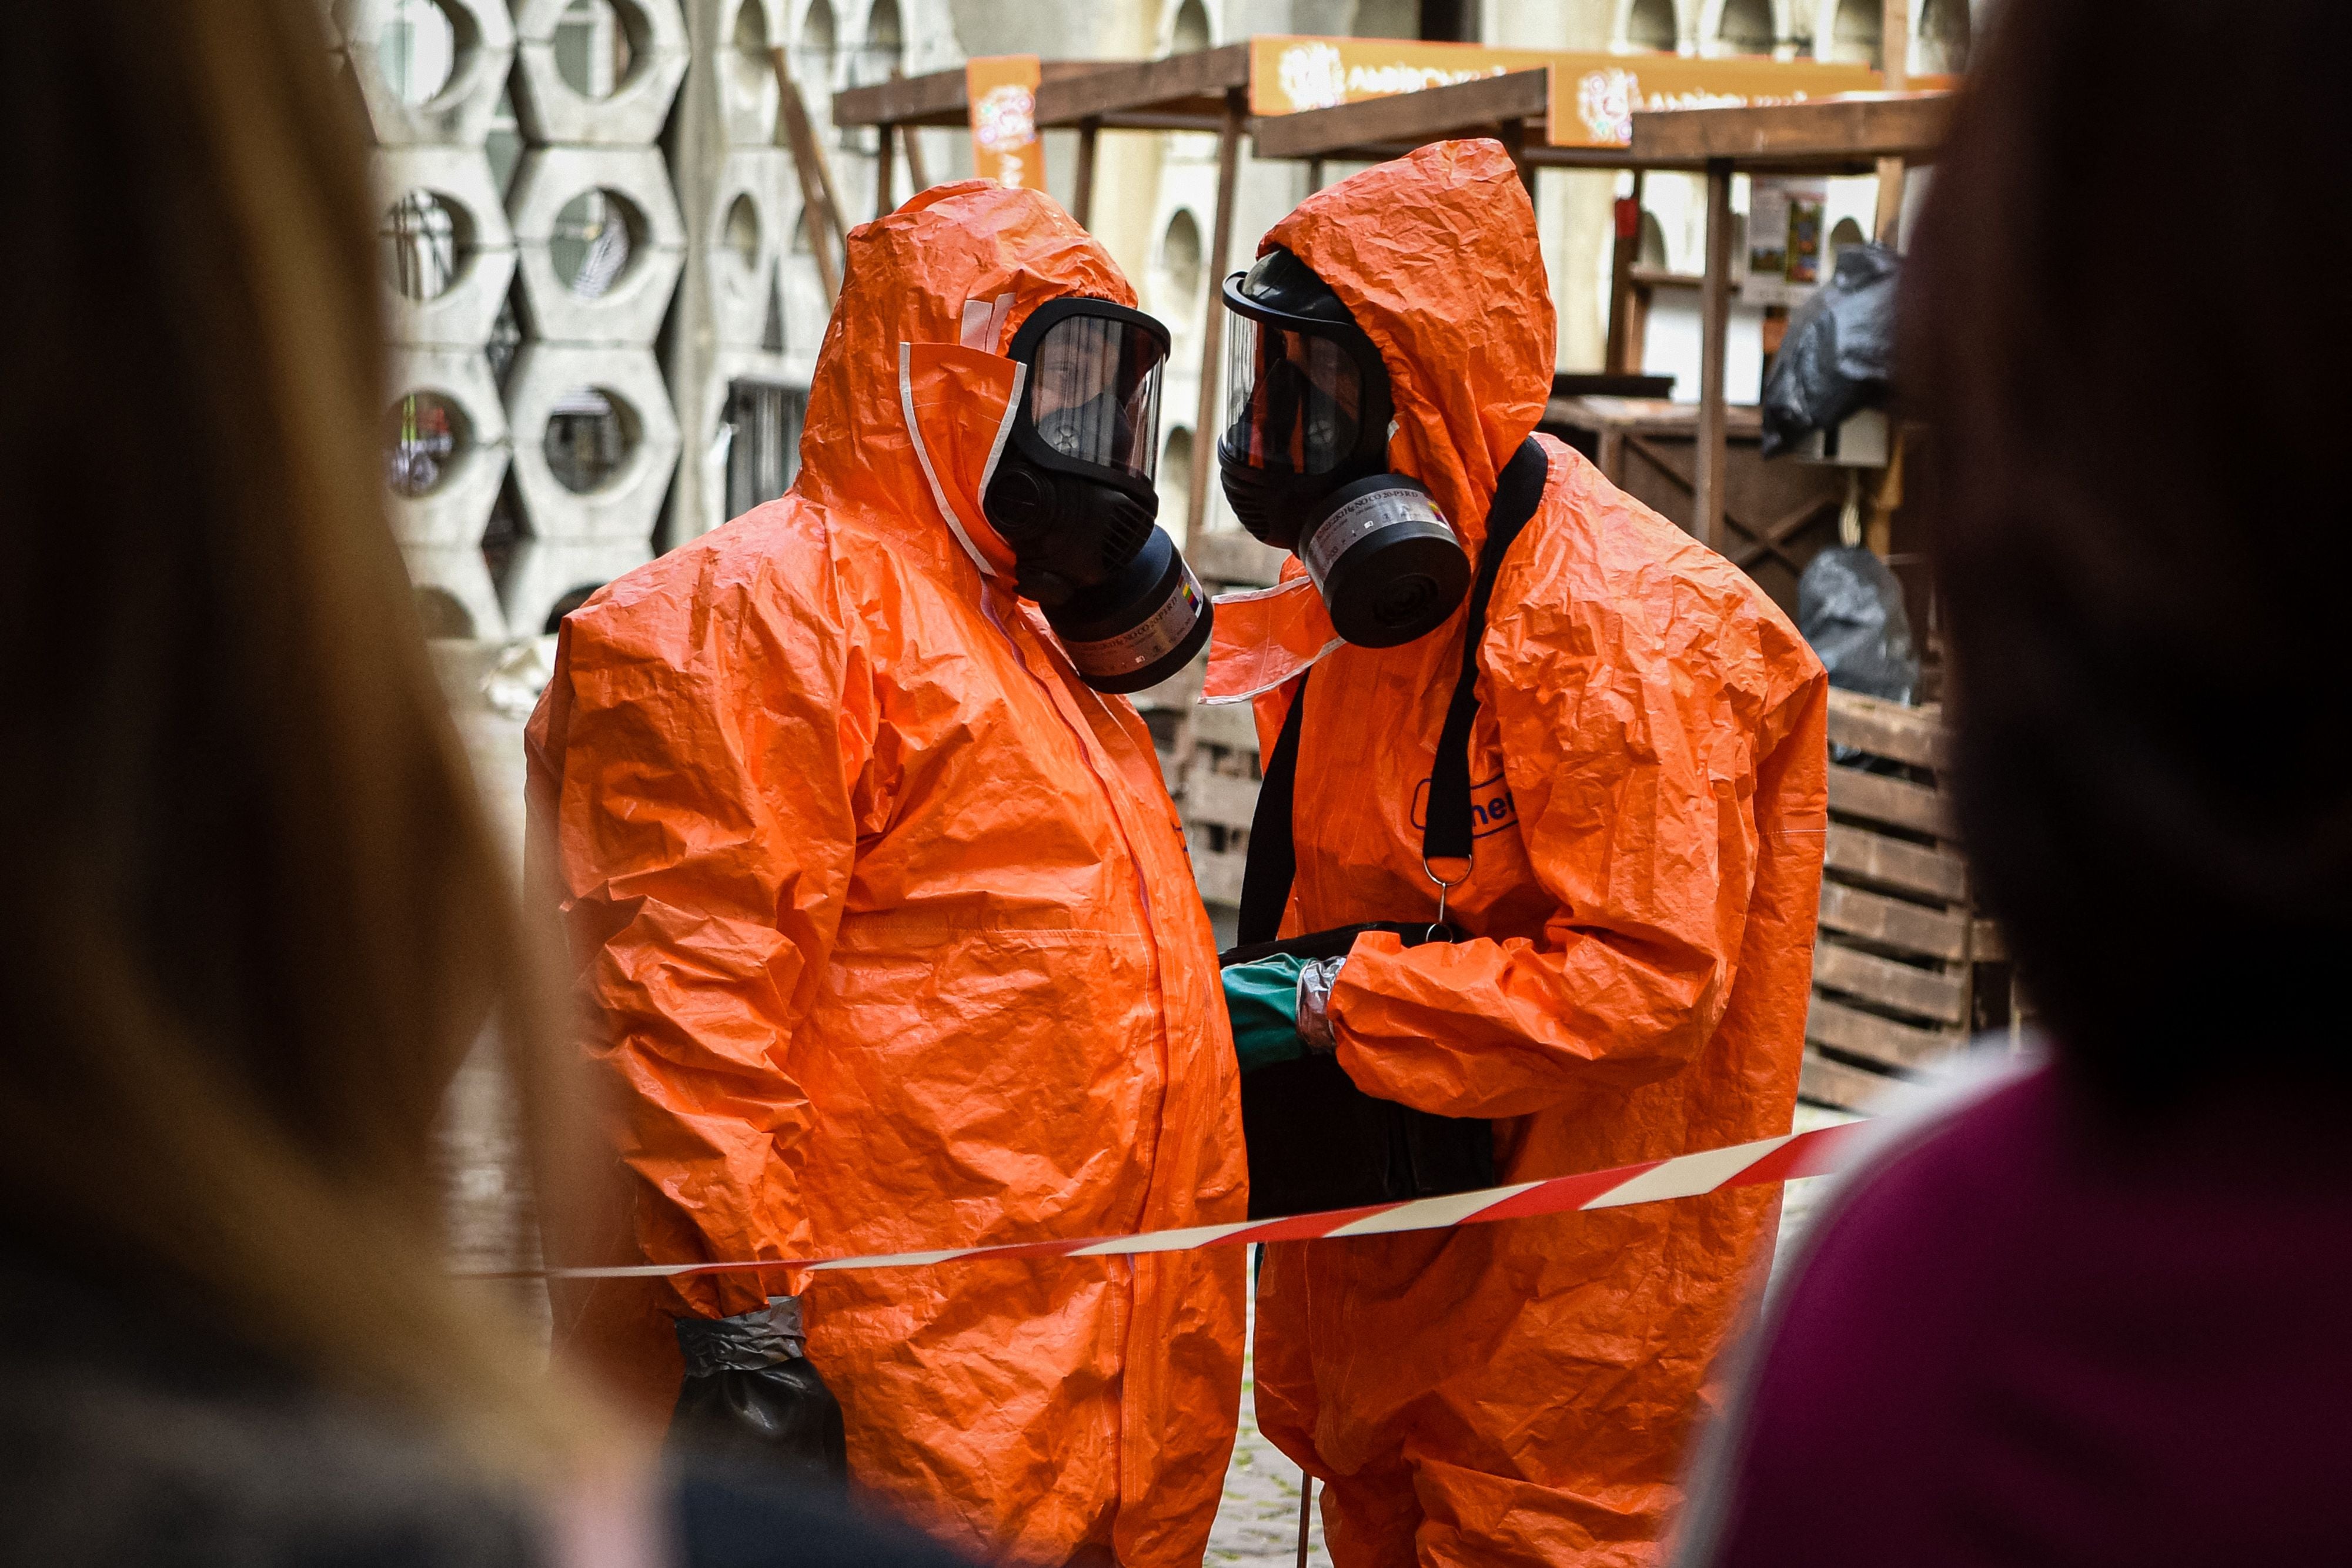 Ukrainian Emergency Ministry rescuers wear protective clothing during a nuclear emergency training session for civilians